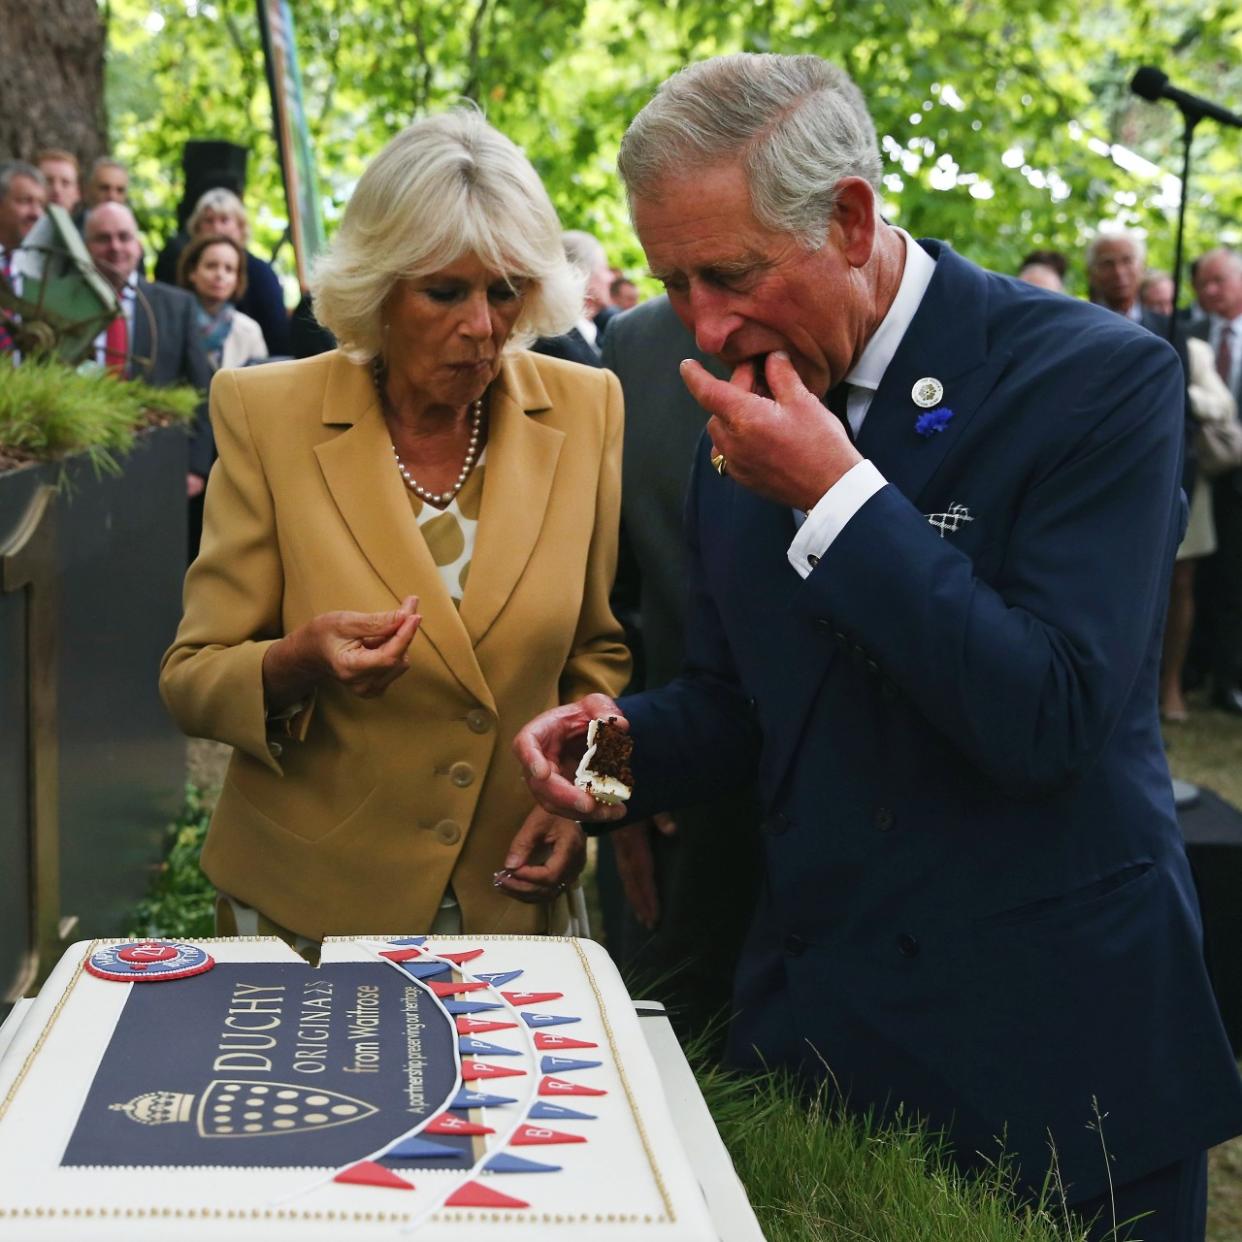  King Charles and Queen Camilla eating 